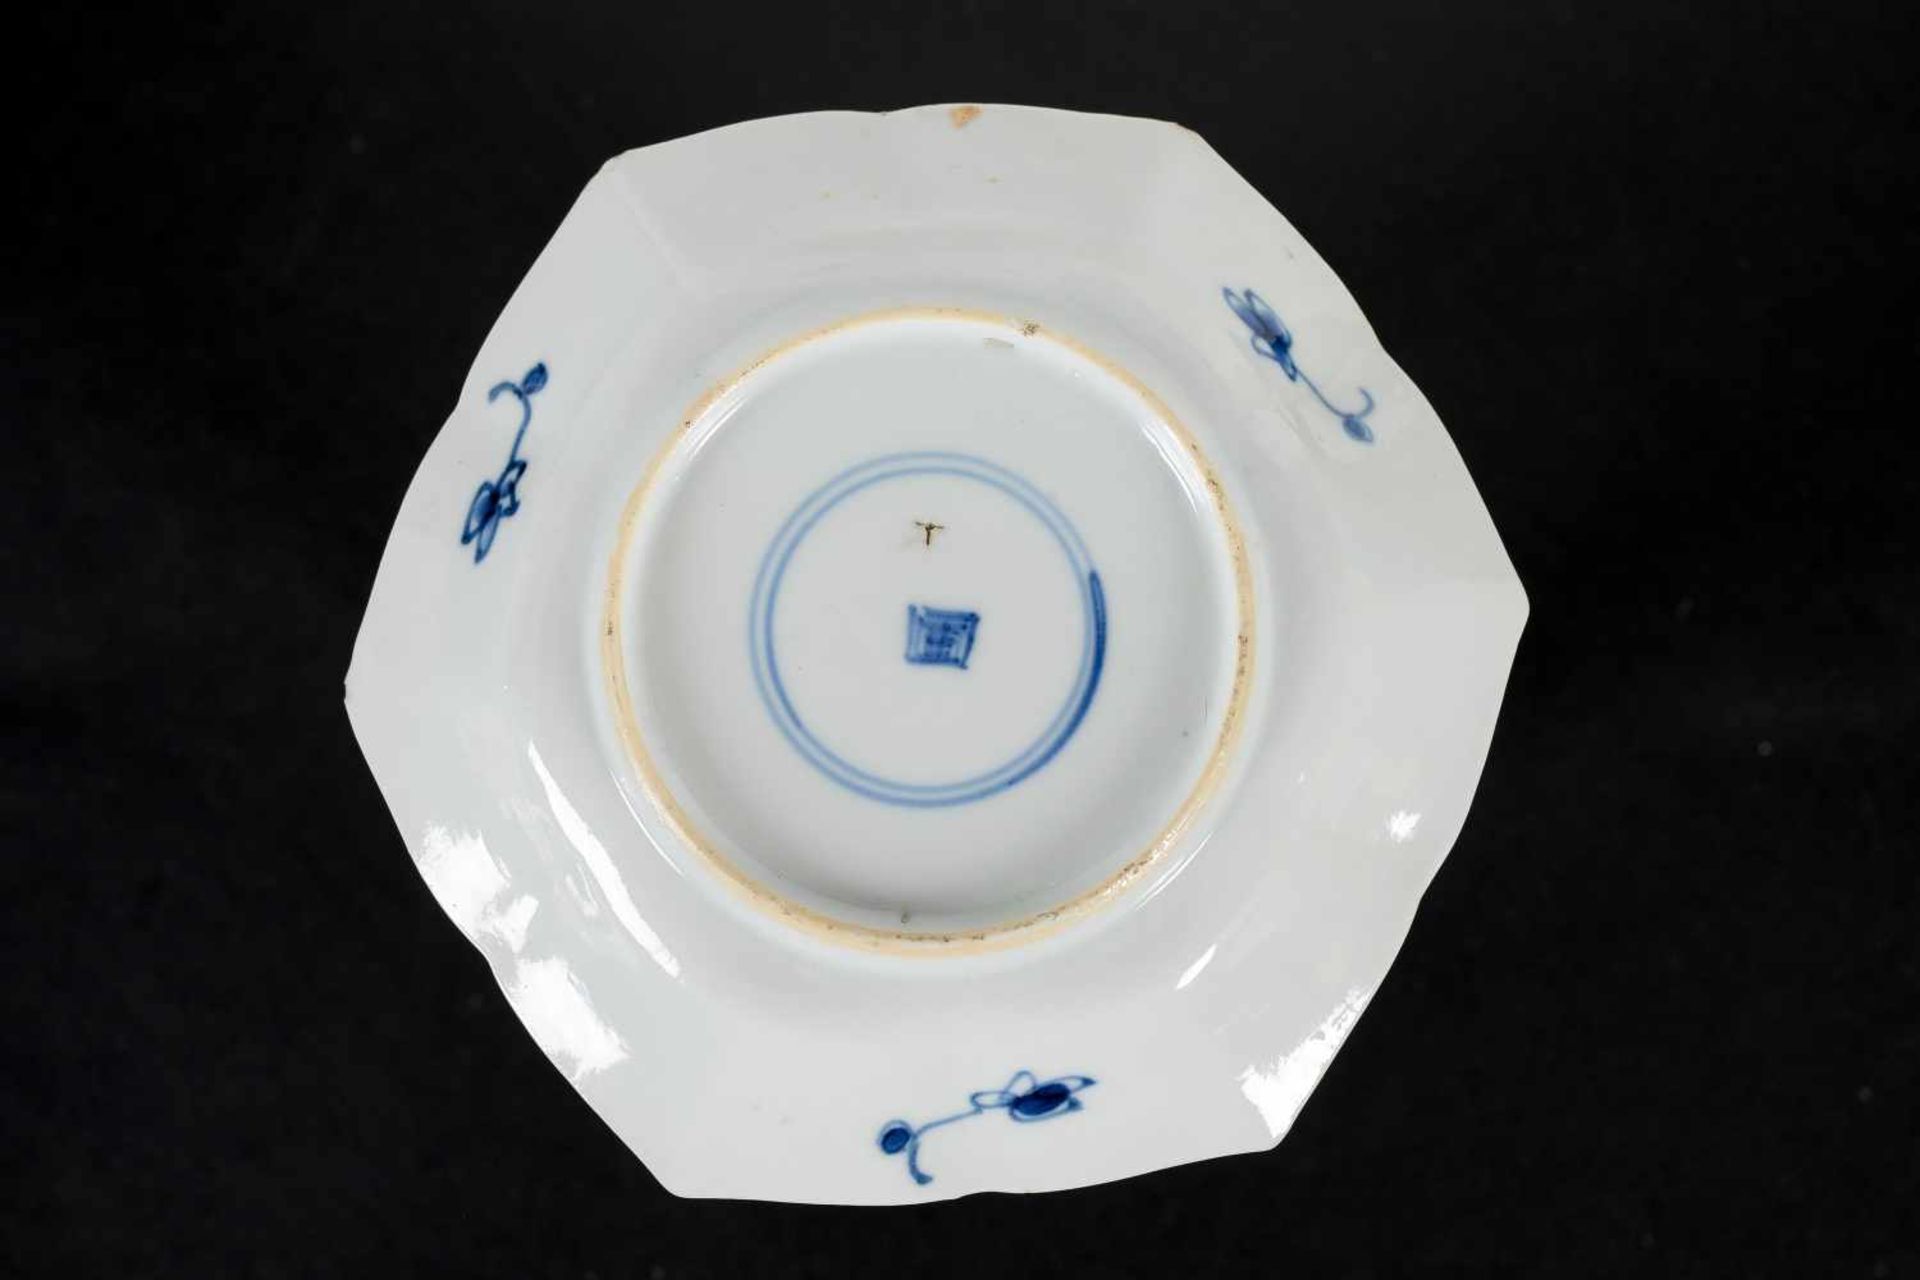 A set of three hexagonal blue and white porcelain cups with saucers, decorated with ducks, flowers - Image 4 of 12